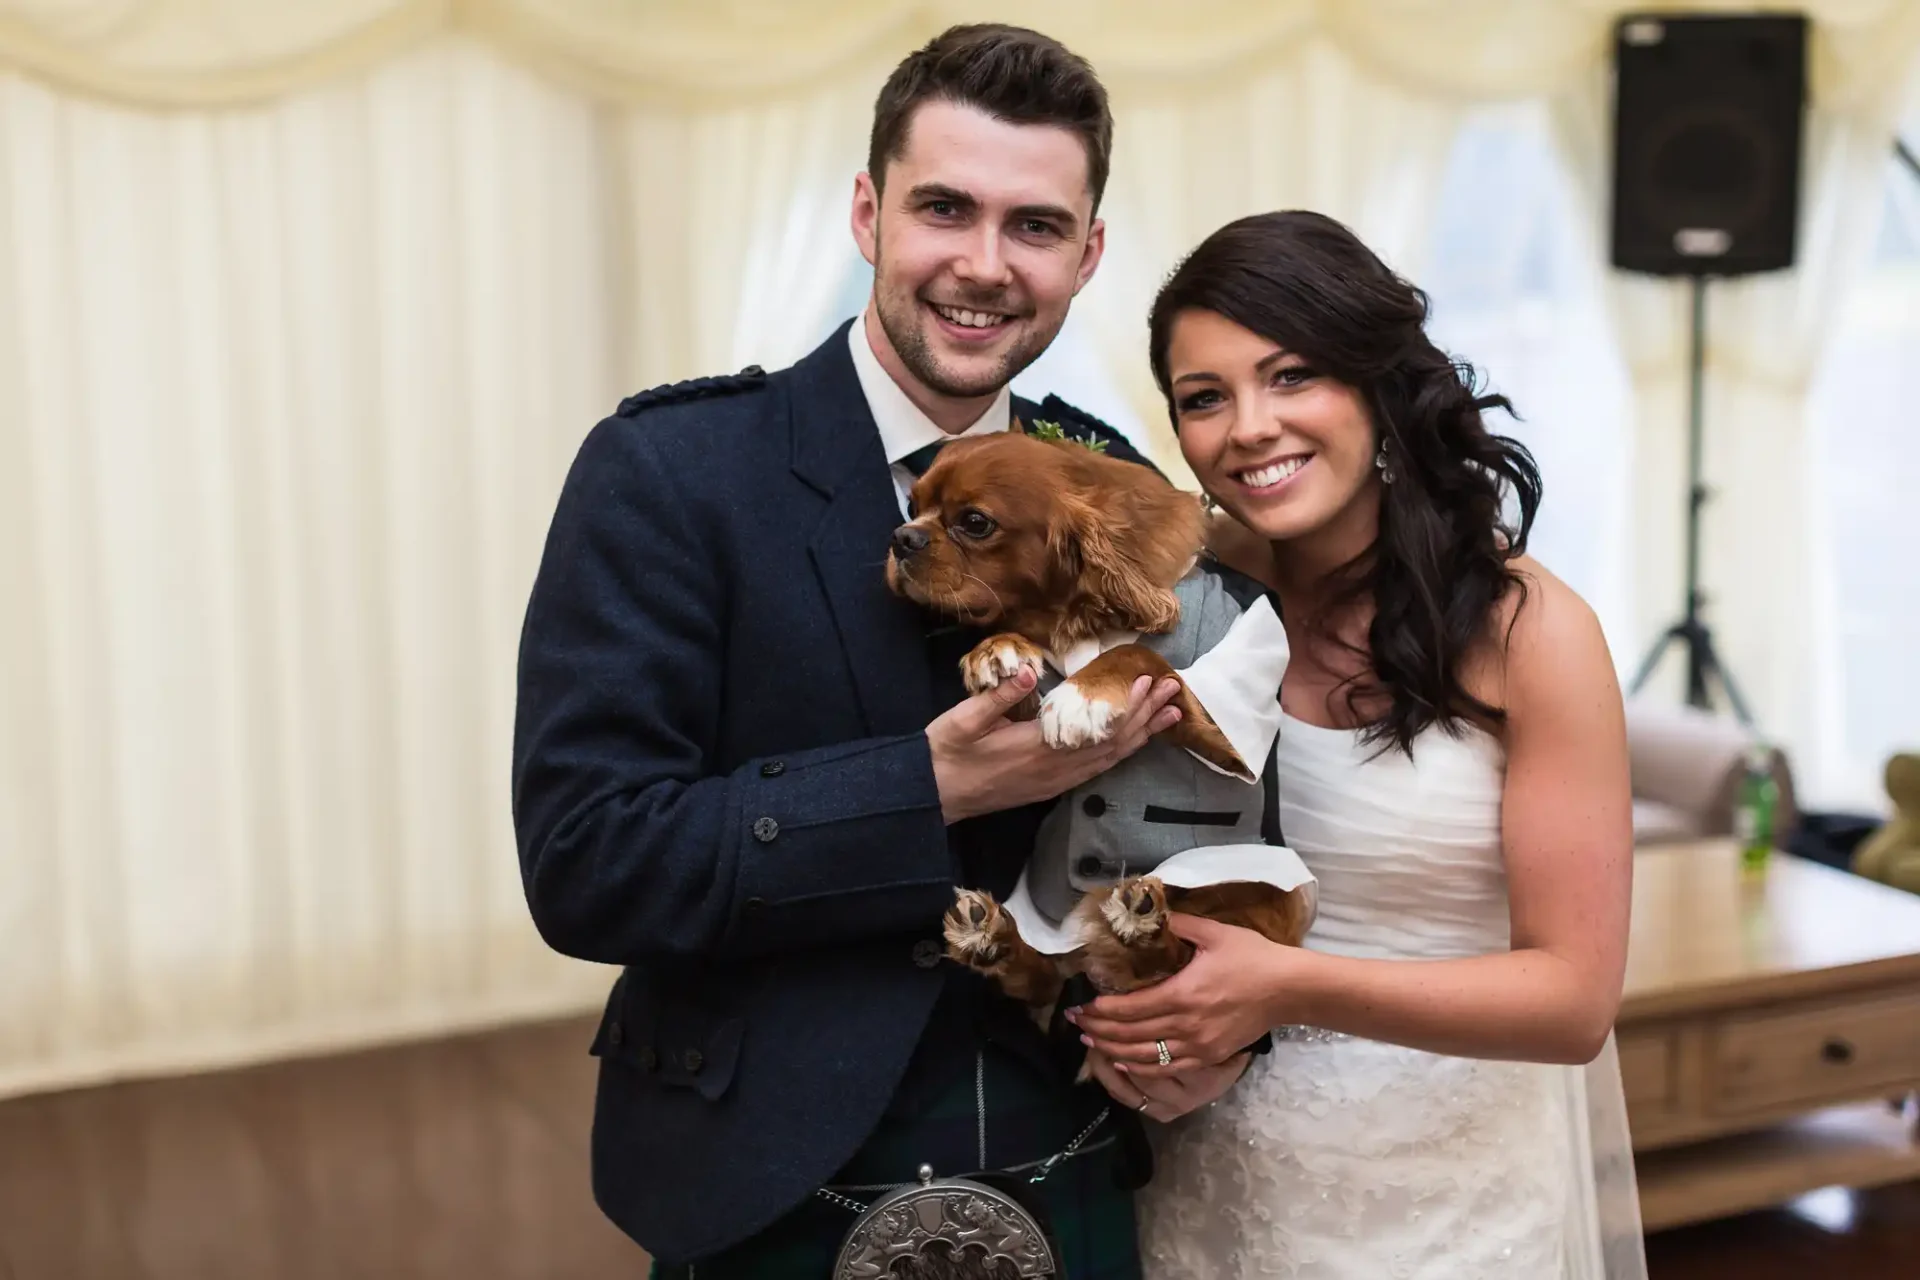 A smiling bride and groom, dressed in formal wedding attire, hold a small brown dog at their wedding reception.